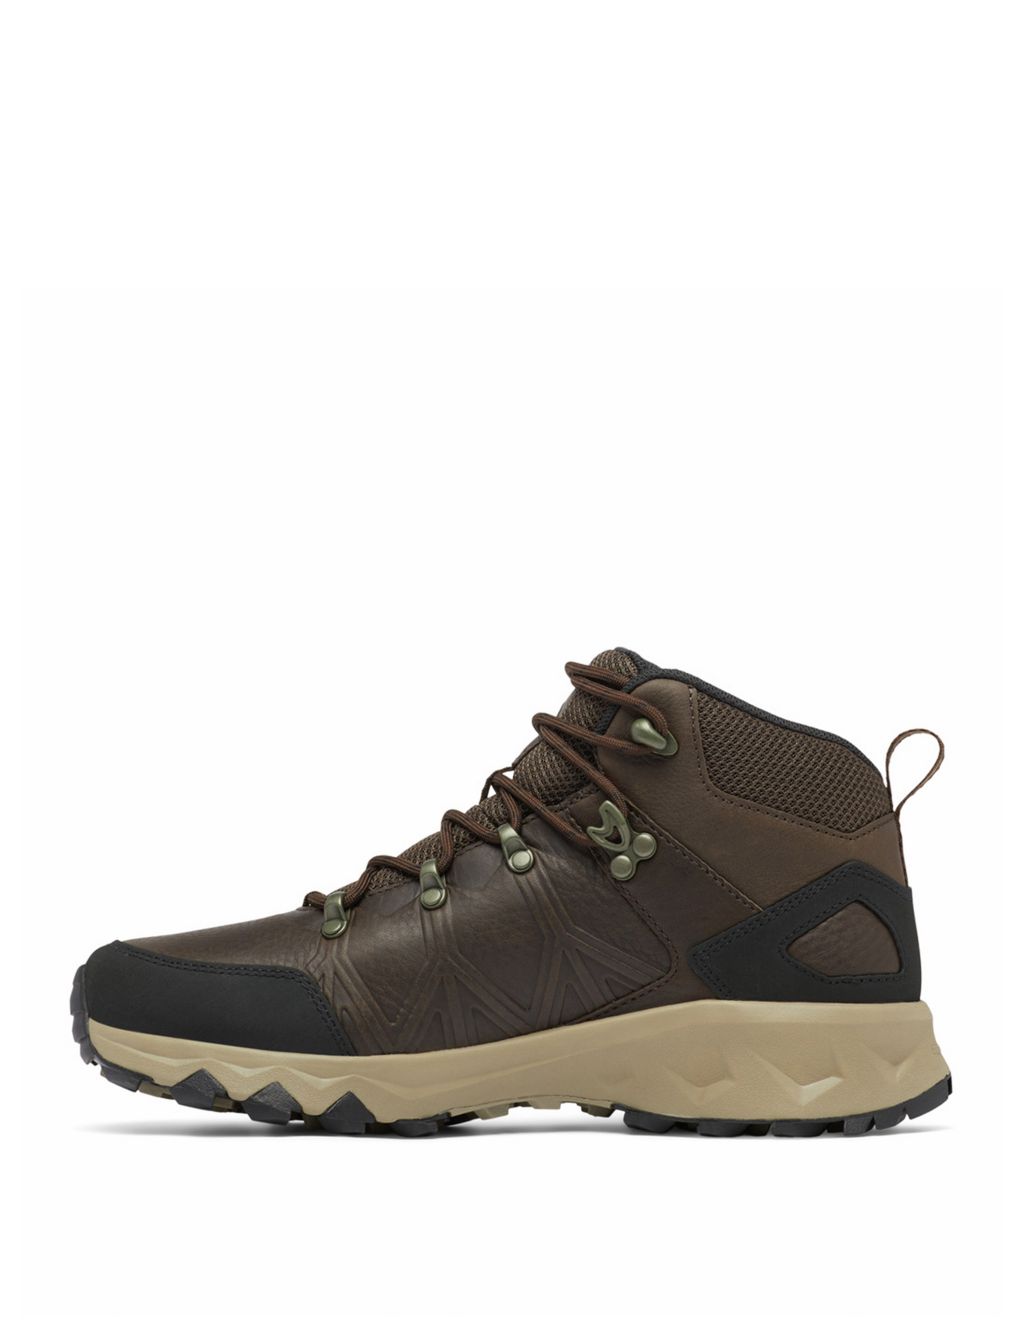 Peakfreak II Mid Outdry Leather Shoes image 6